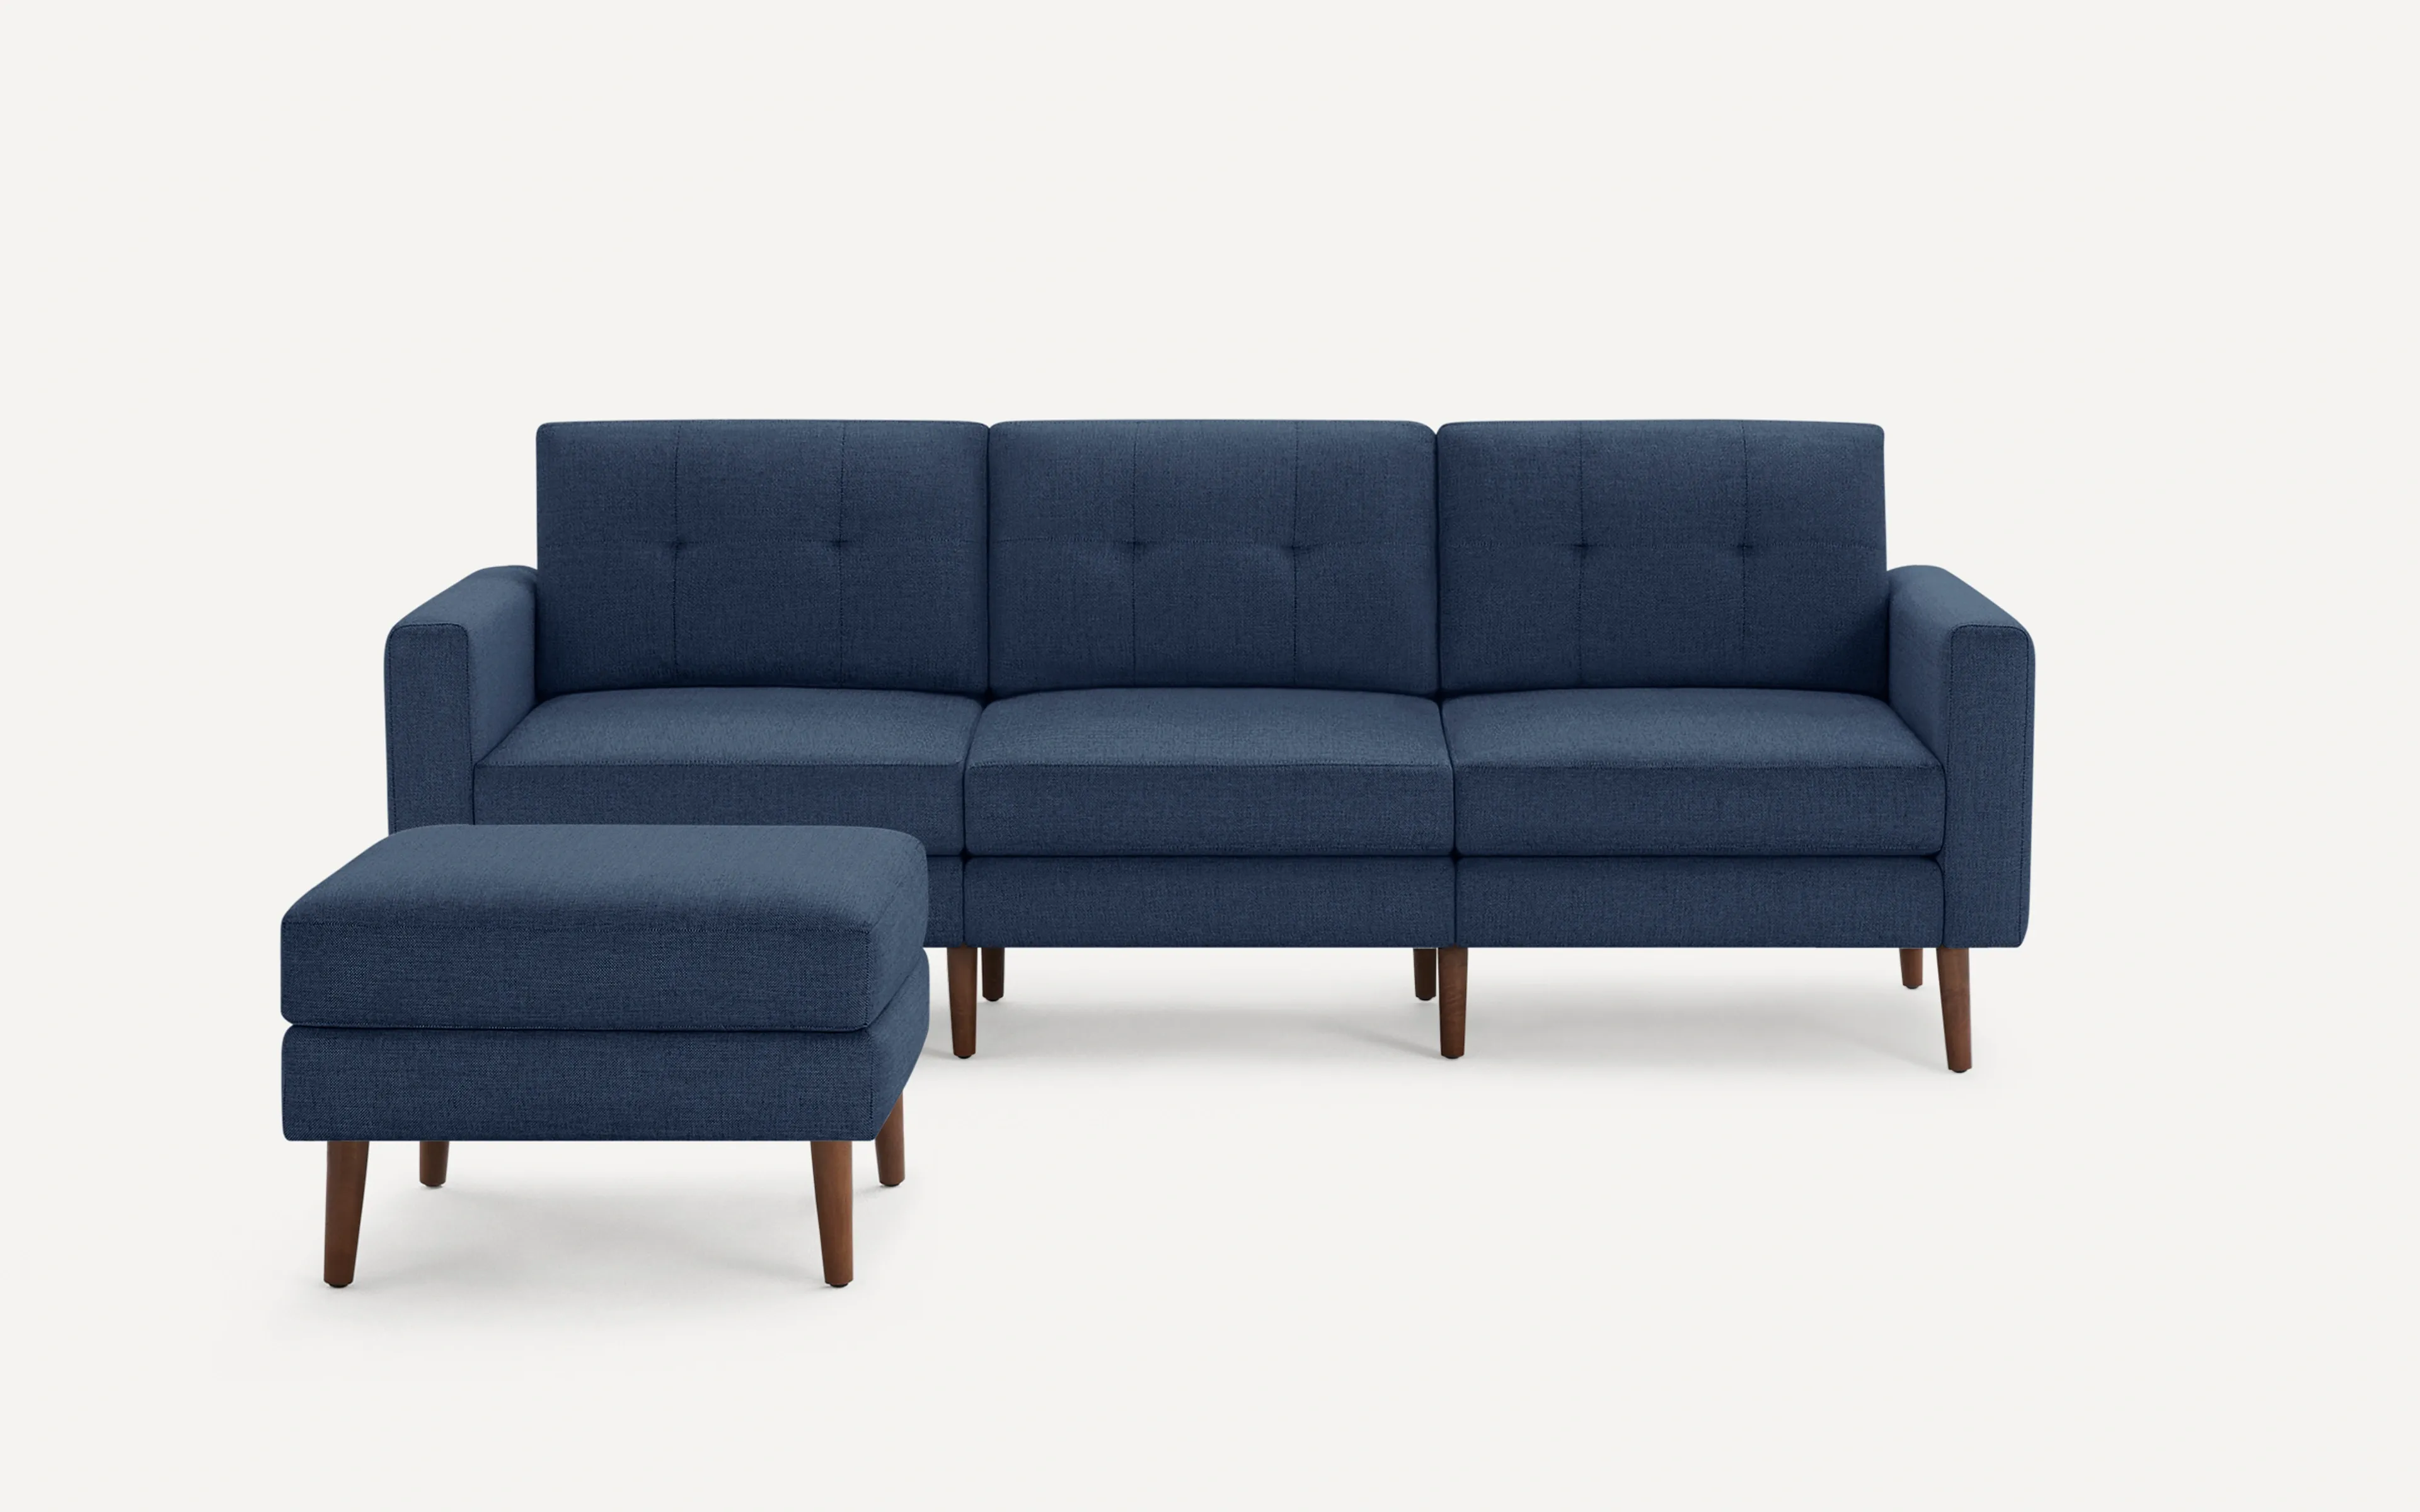 Original Nomad Sofa with Ottoman in Navy Blue Fabric